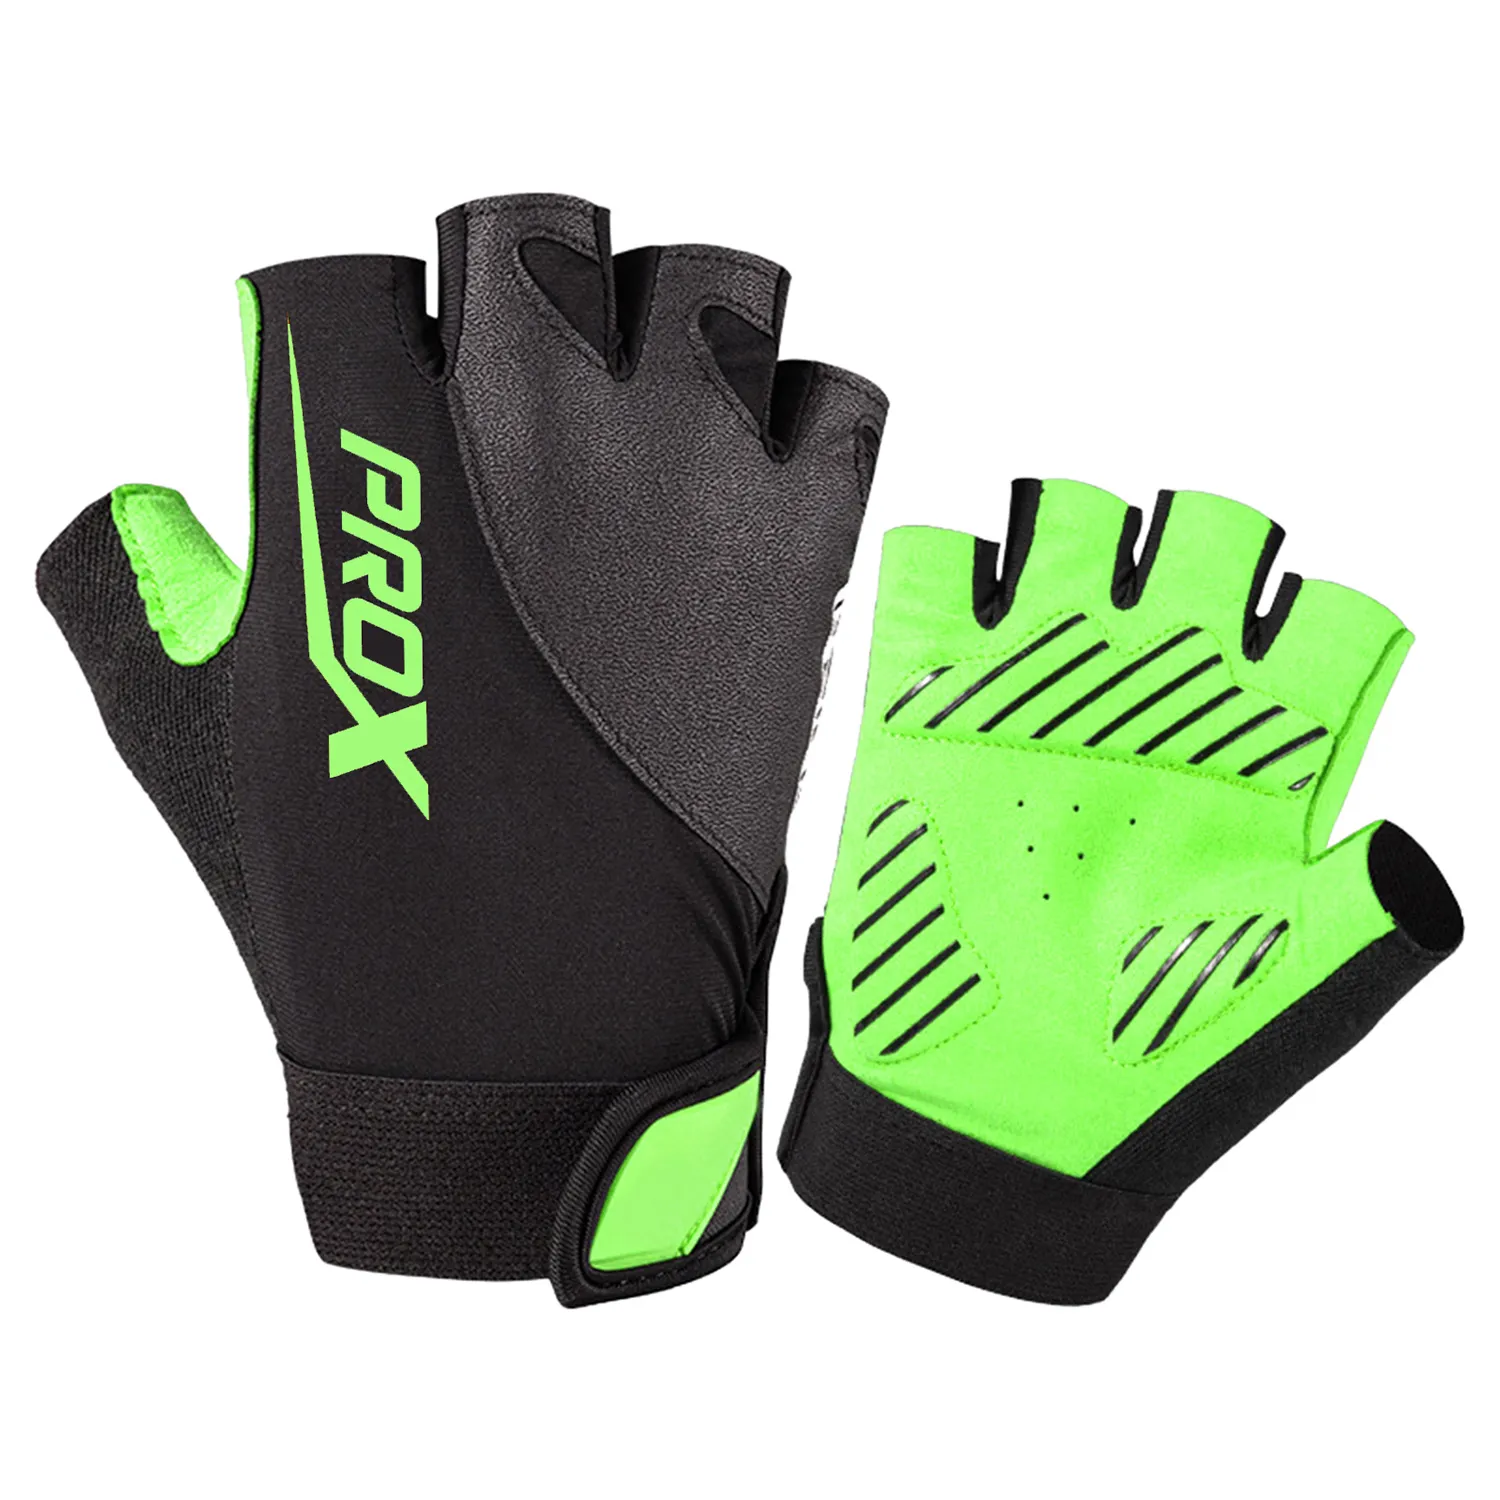 Best Performance Wholesale Cheap Comfortable Mountain Bike Gloves Shockproof Cycling Riding MTB BMX Motocross Gloves